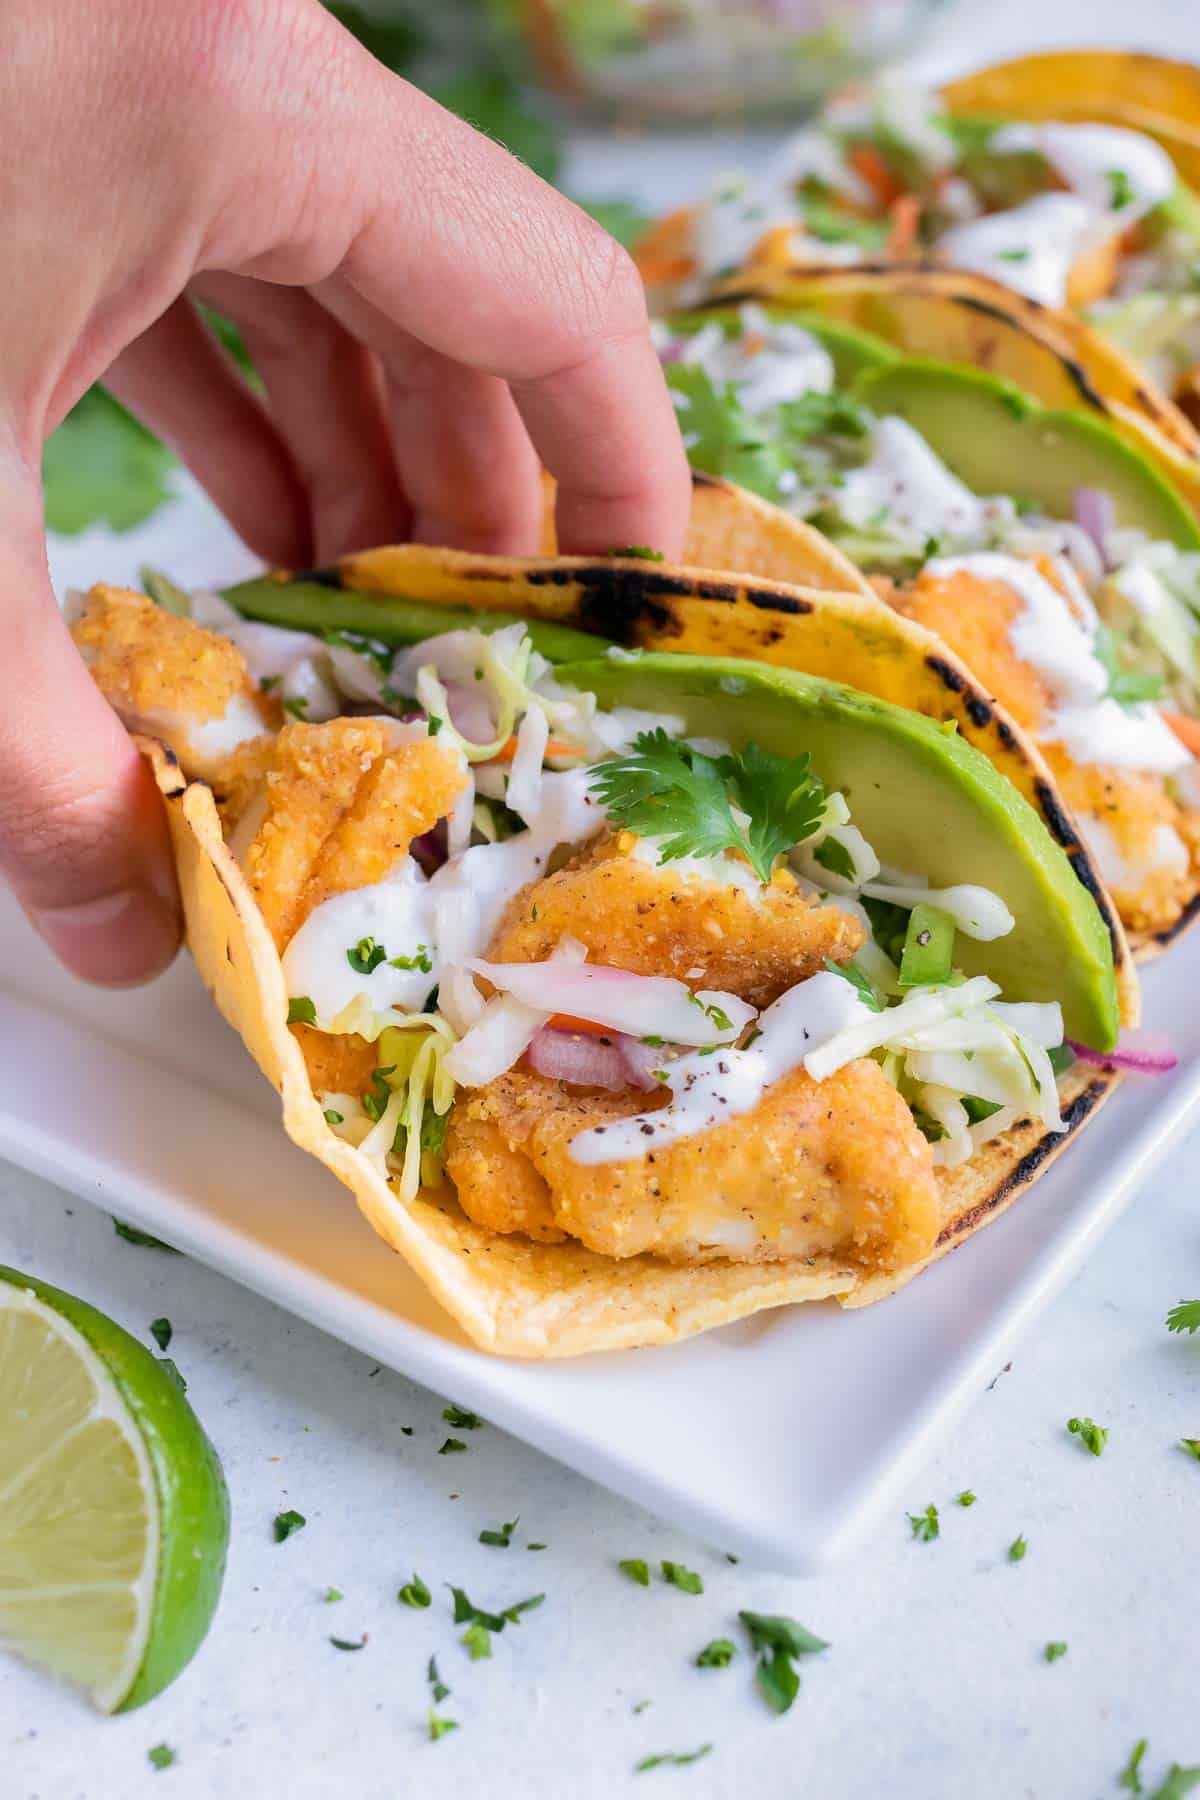 A hand is used to lift a fish taco with lime crema from the plate.